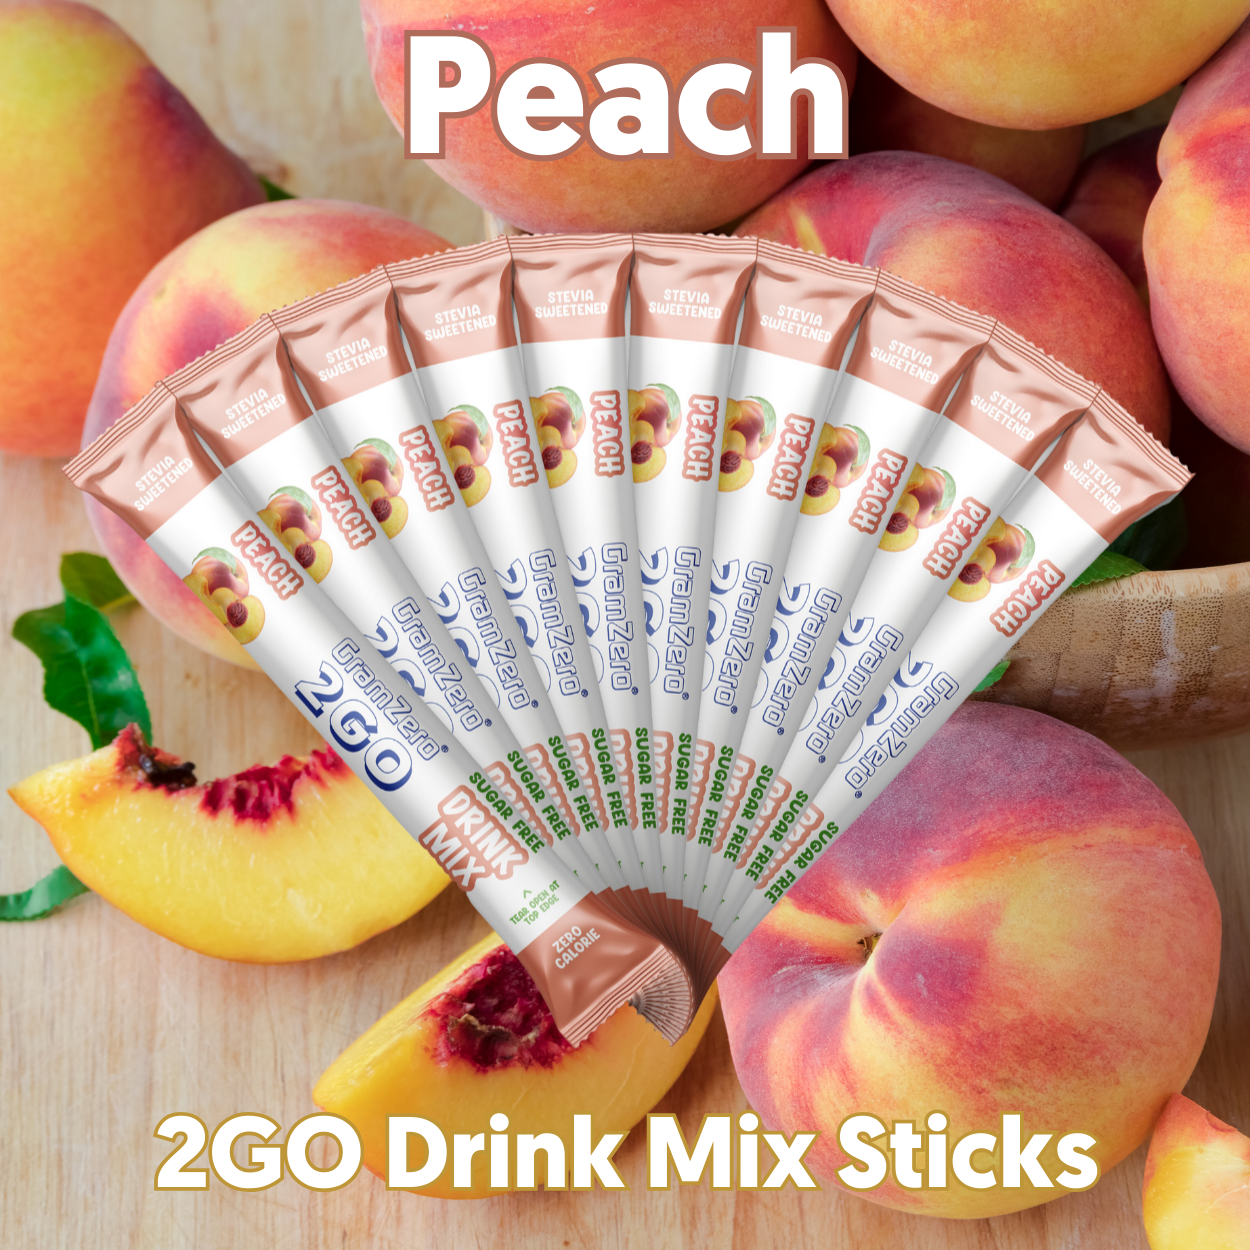 PEACH 2GO Sugar Free Drink Mix Sticks: 10 Pack ~ Great for Loaded Tea Kits